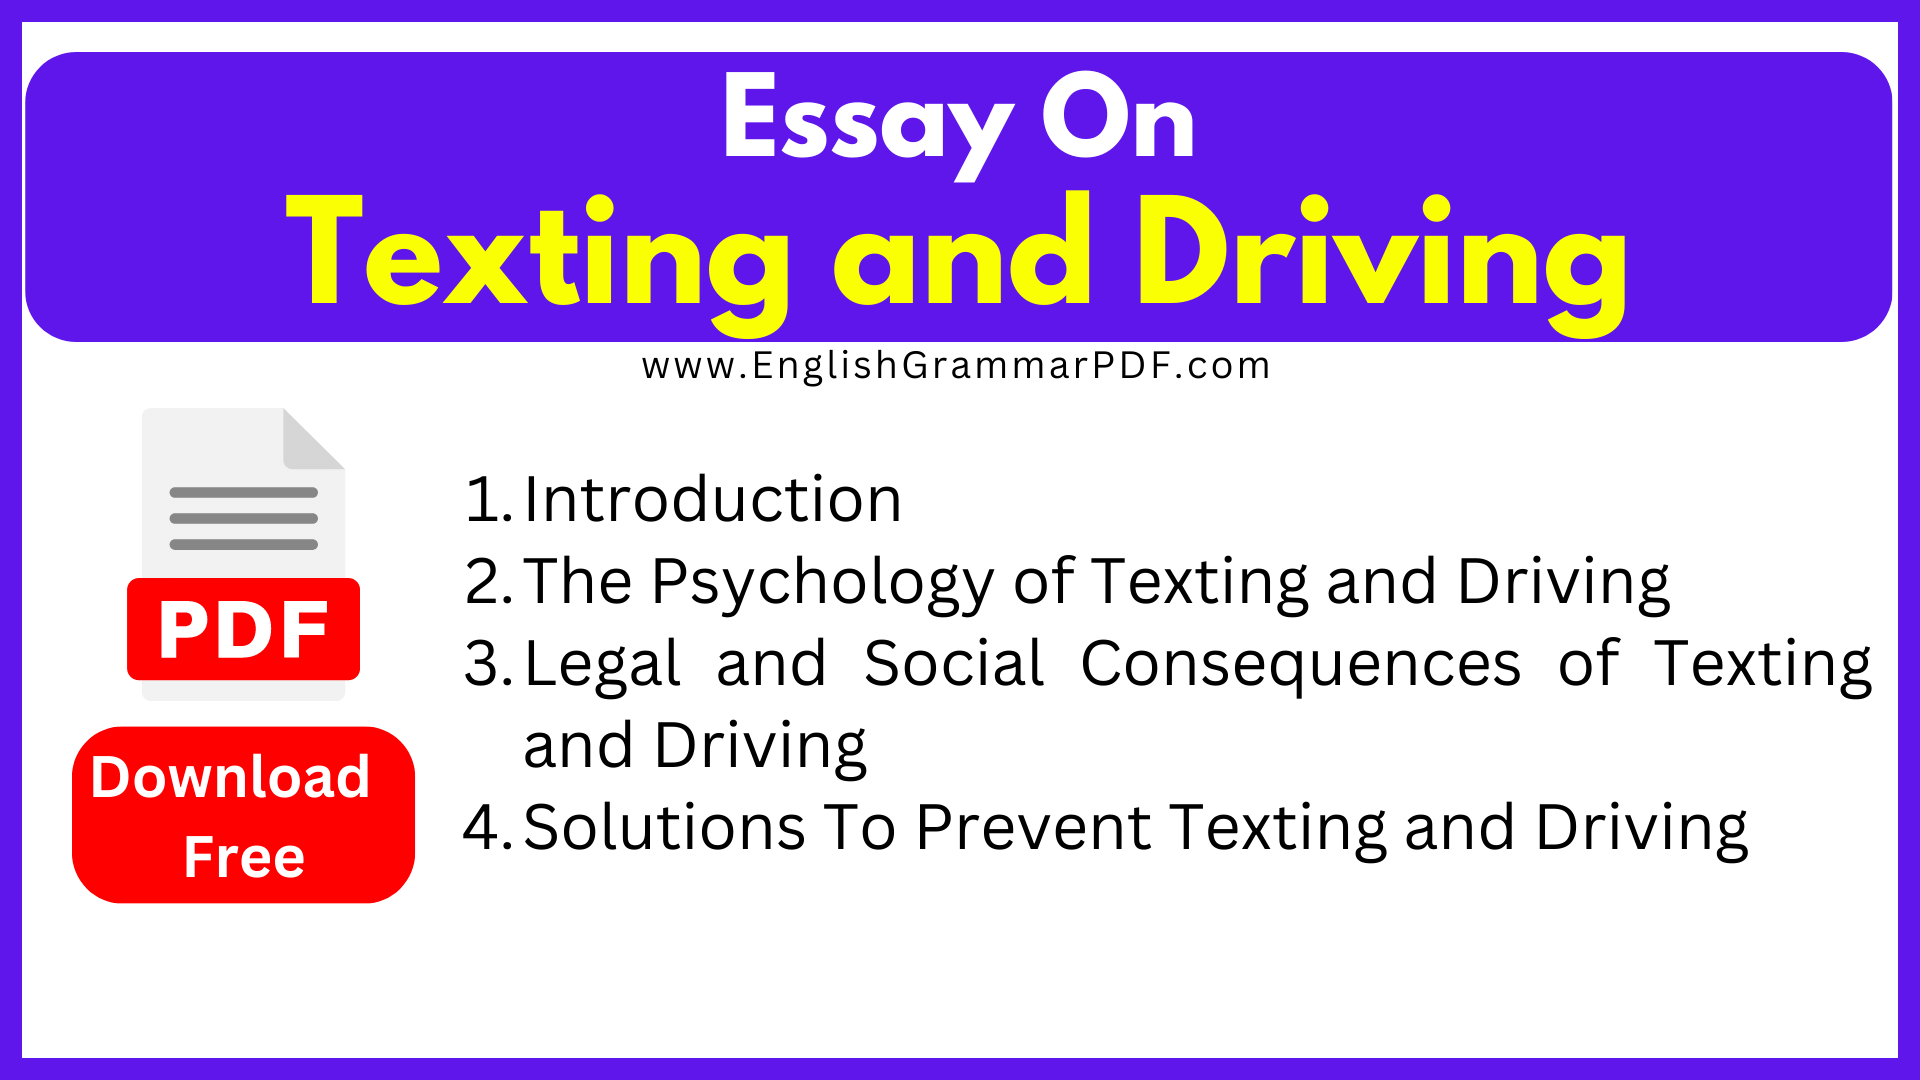 Essay On Texting and Driving